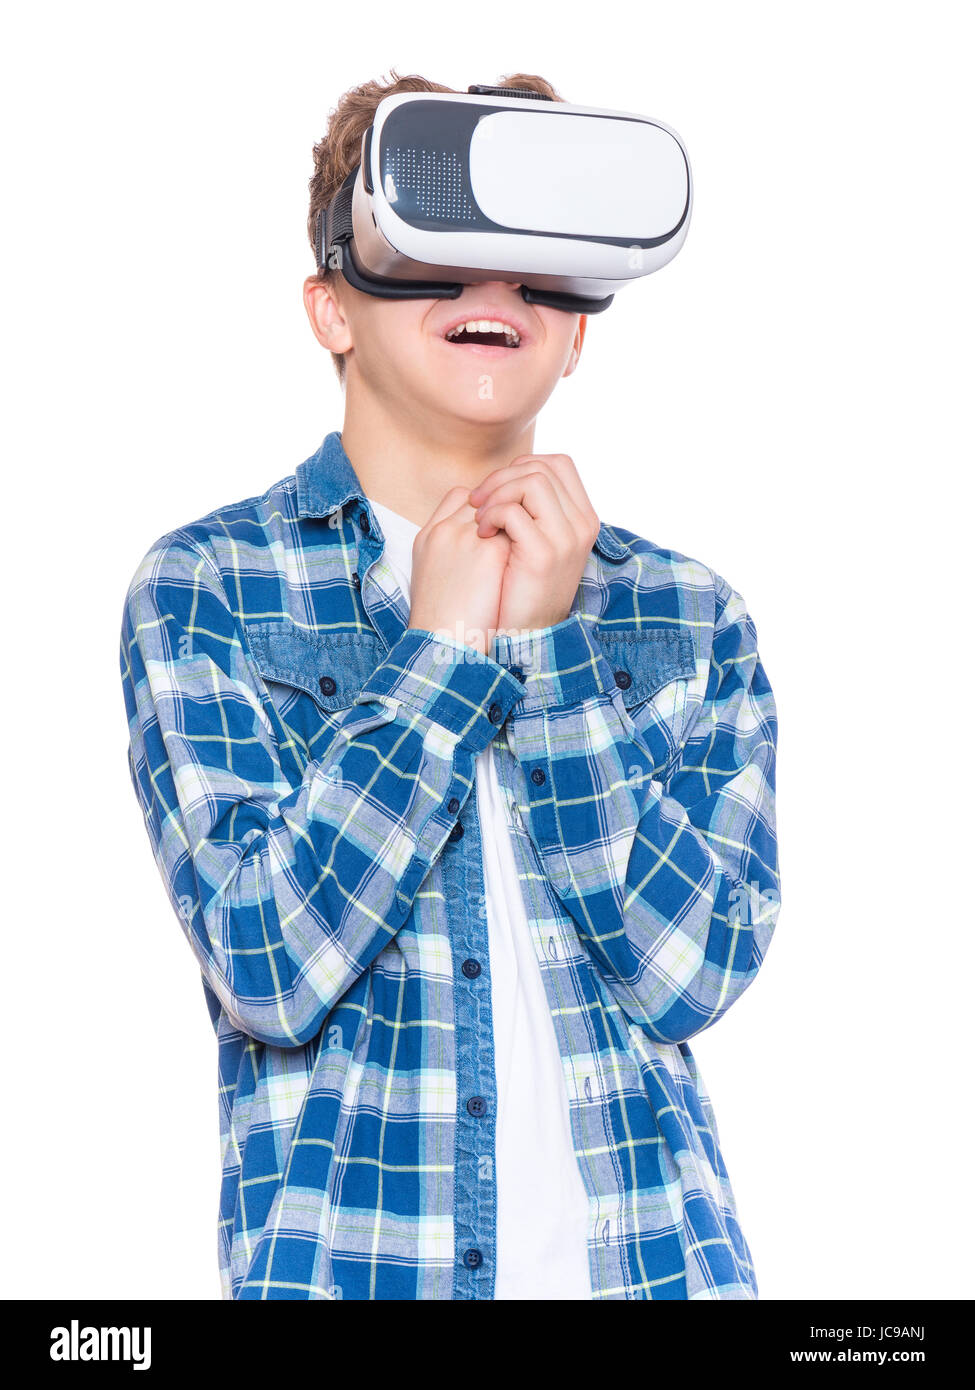 Amazed teen boy screaming, wearing virtual reality goggles watching movies or playing video games. Surprised teenager looking in VR glasses. Child exp Stock Photo